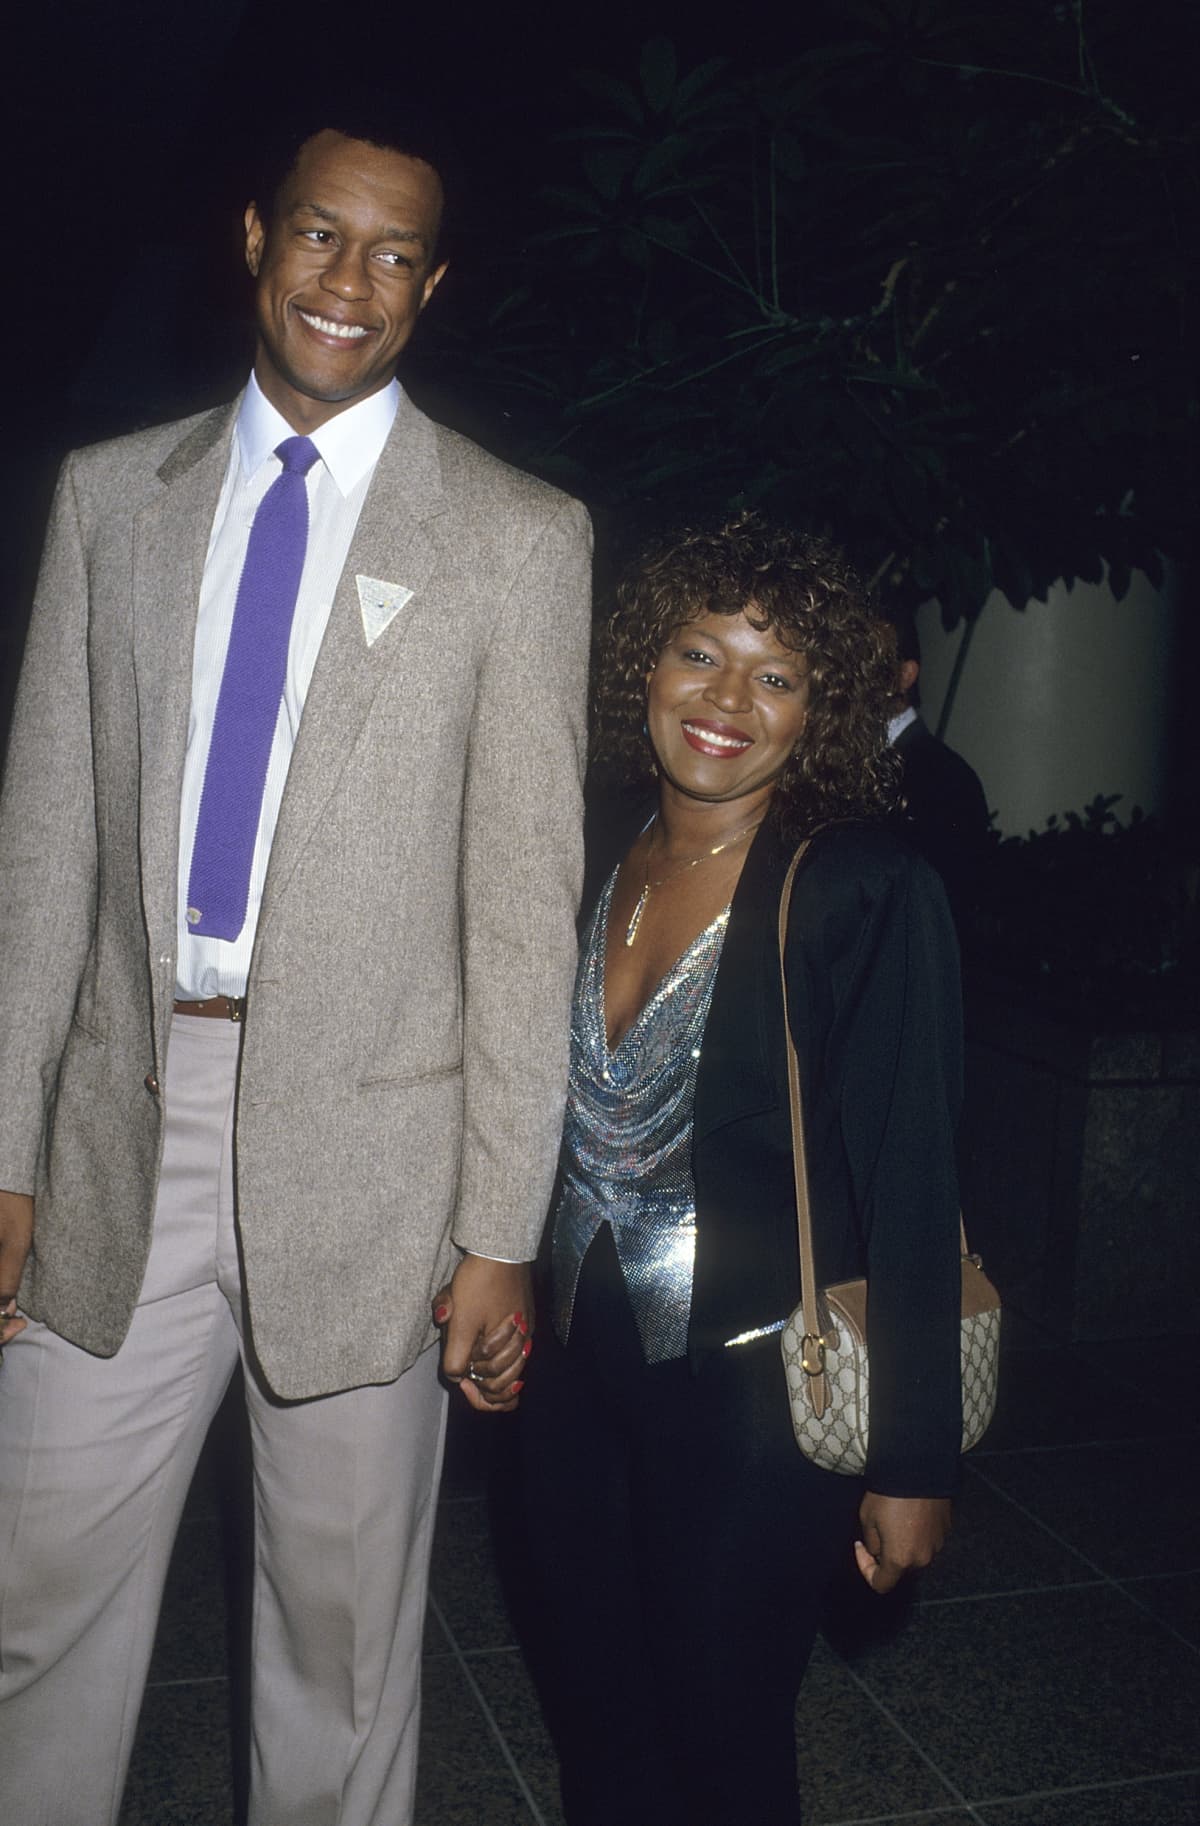 LOS ANGELES - JULY 2:   Actor Kevin Peter Hall and actress Alaina Reed attend the "She Loves Me!" Opening Night Performance on July 2, 1987 at the Dorothy Chandler Pavilion, Music Center in Los Angeles, California. (Photo by Ron Galella, Ltd./Ron Galella Collection via Getty Images)